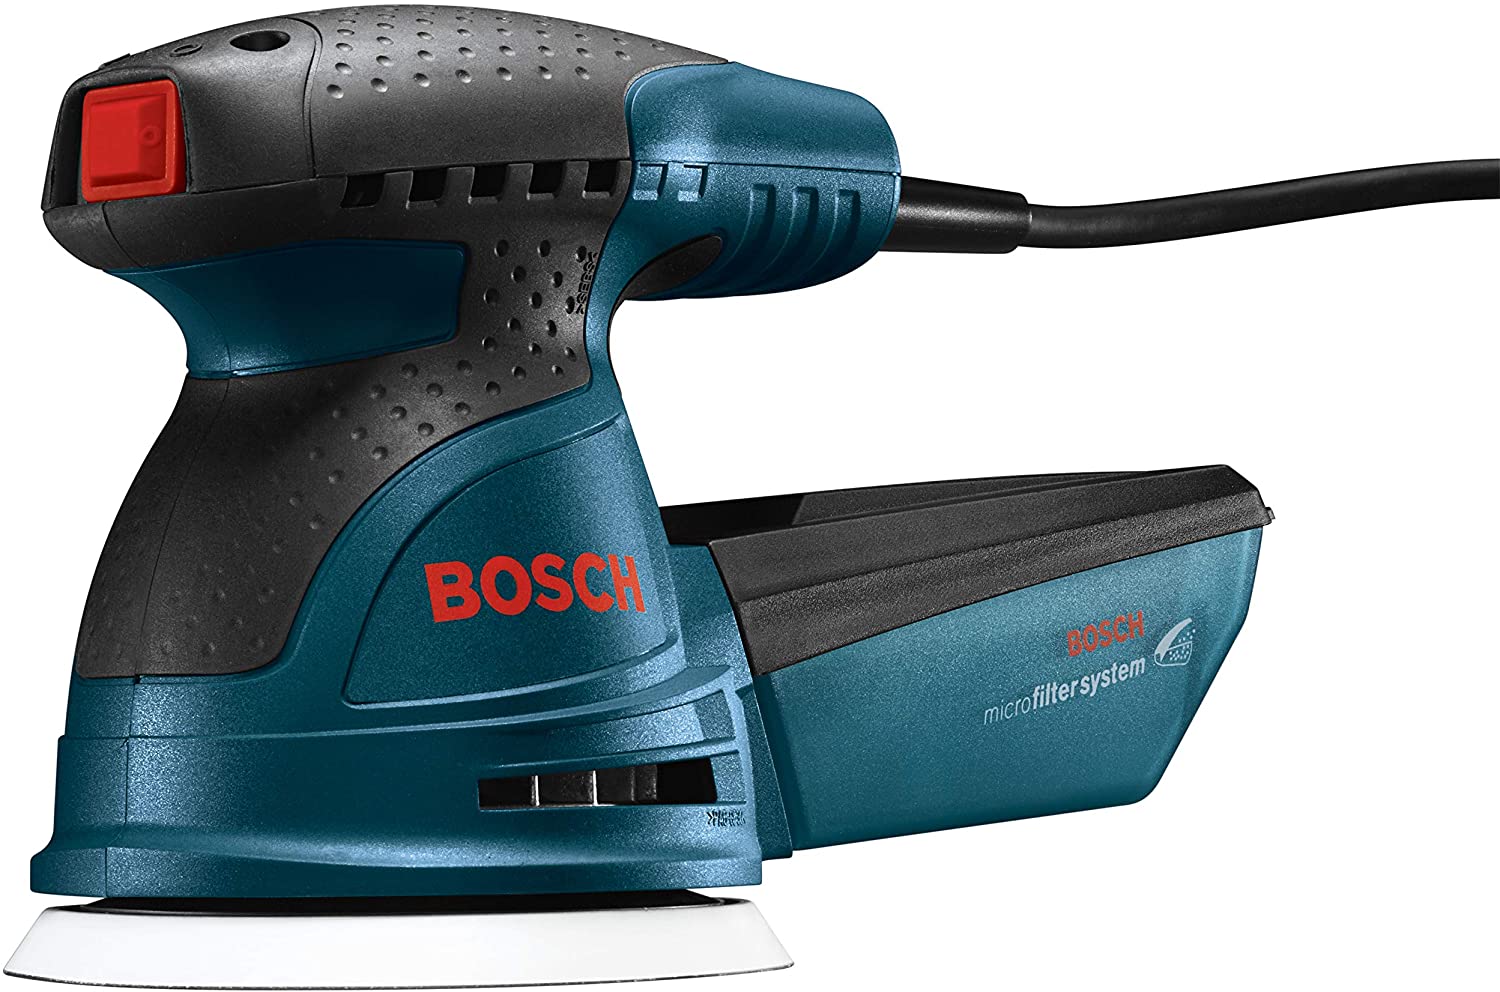 Bosch ROS20VSC Palm Sander - 2.5 Amp 5 Inches Corded Variable Speed Random Orbital Sander Polisher Kit with Dust Collector and Soft Carrying Bag, Blue